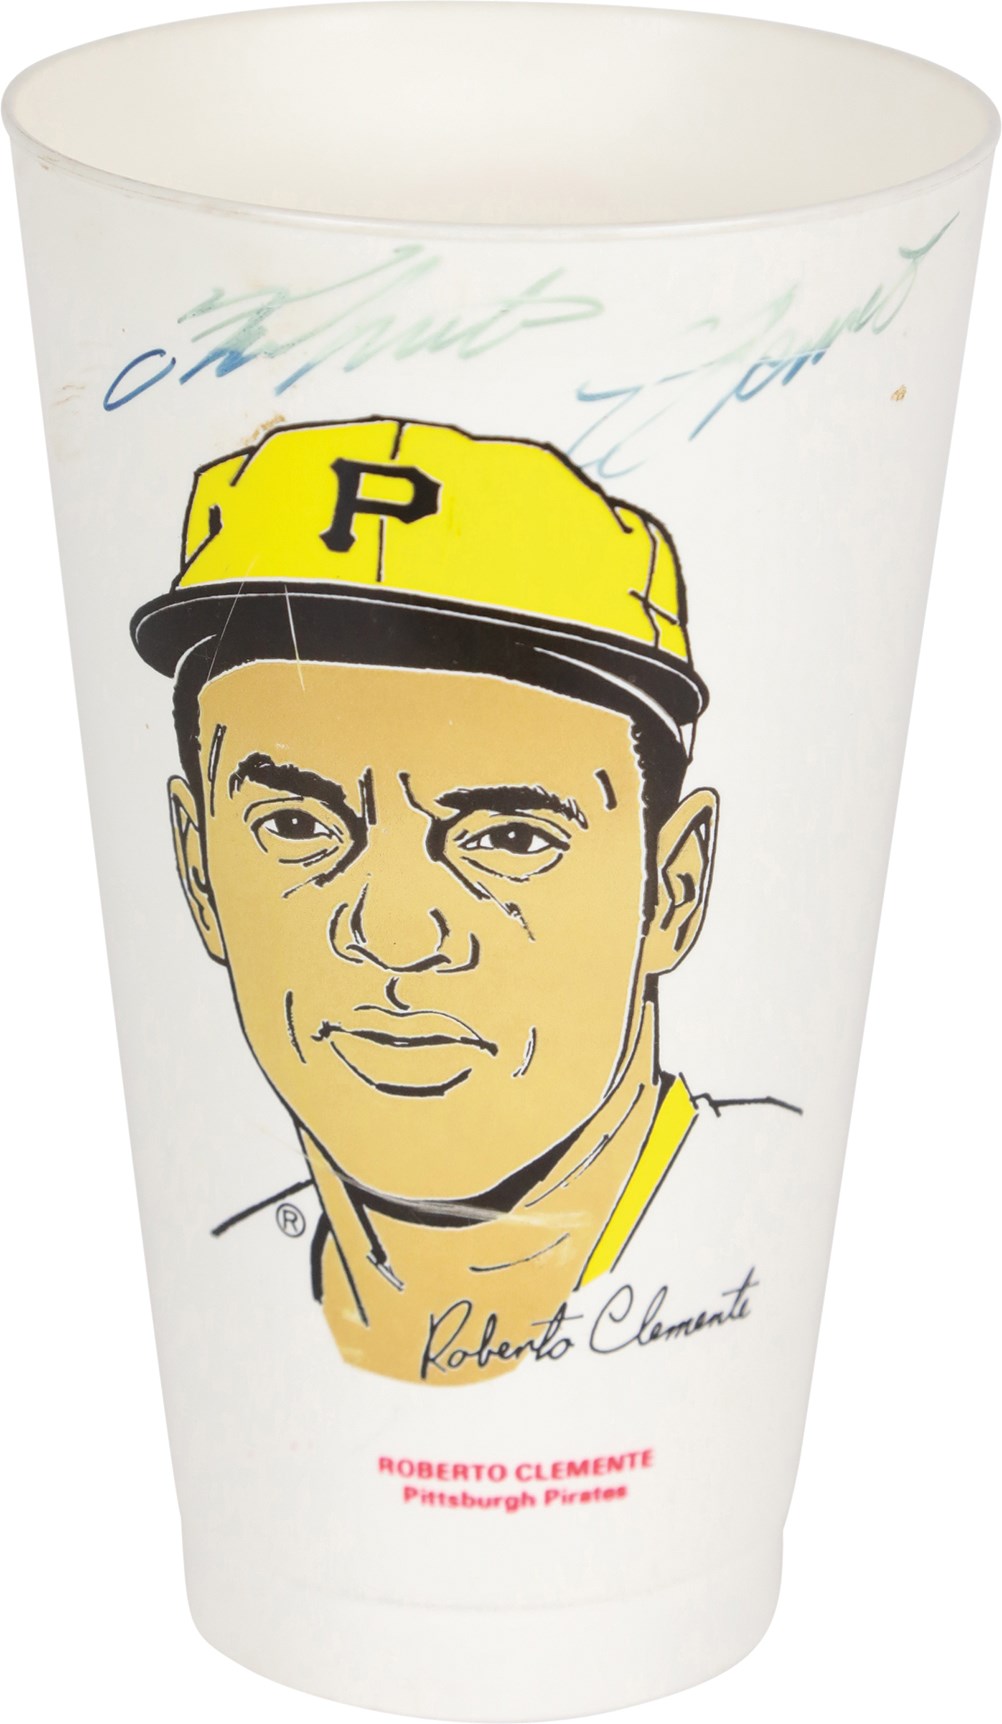 Clemente and Pittsburgh Pirates - Only Known 1972 Roberto Clemente Signed 7-Eleven Slurpee Cup (PSA)